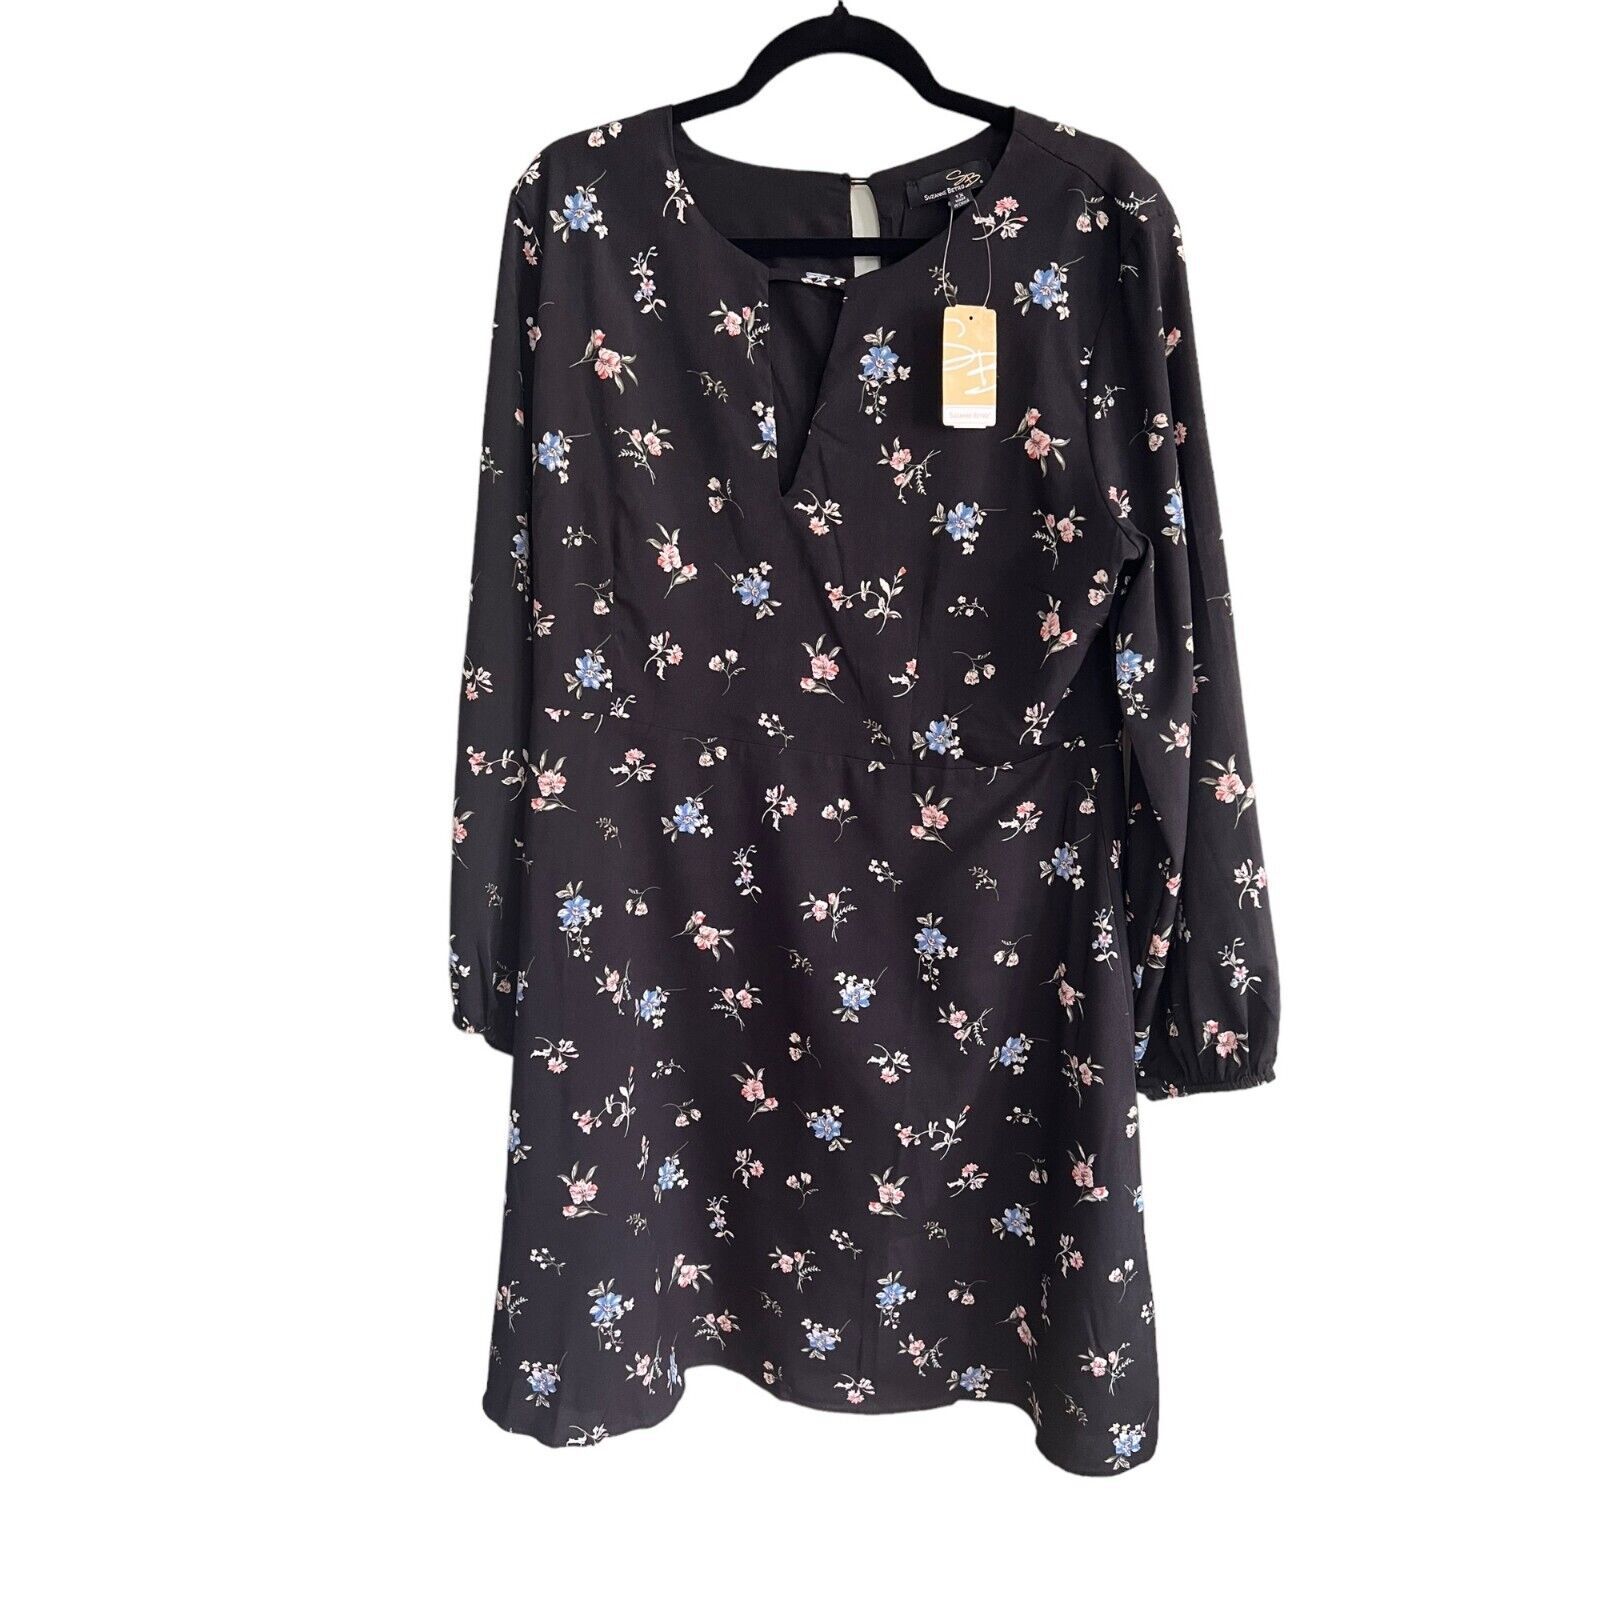 Primary image for NWT SUZANNE BETRO Size 1X Black Floral Print Dress Keyhole Long Sleeve